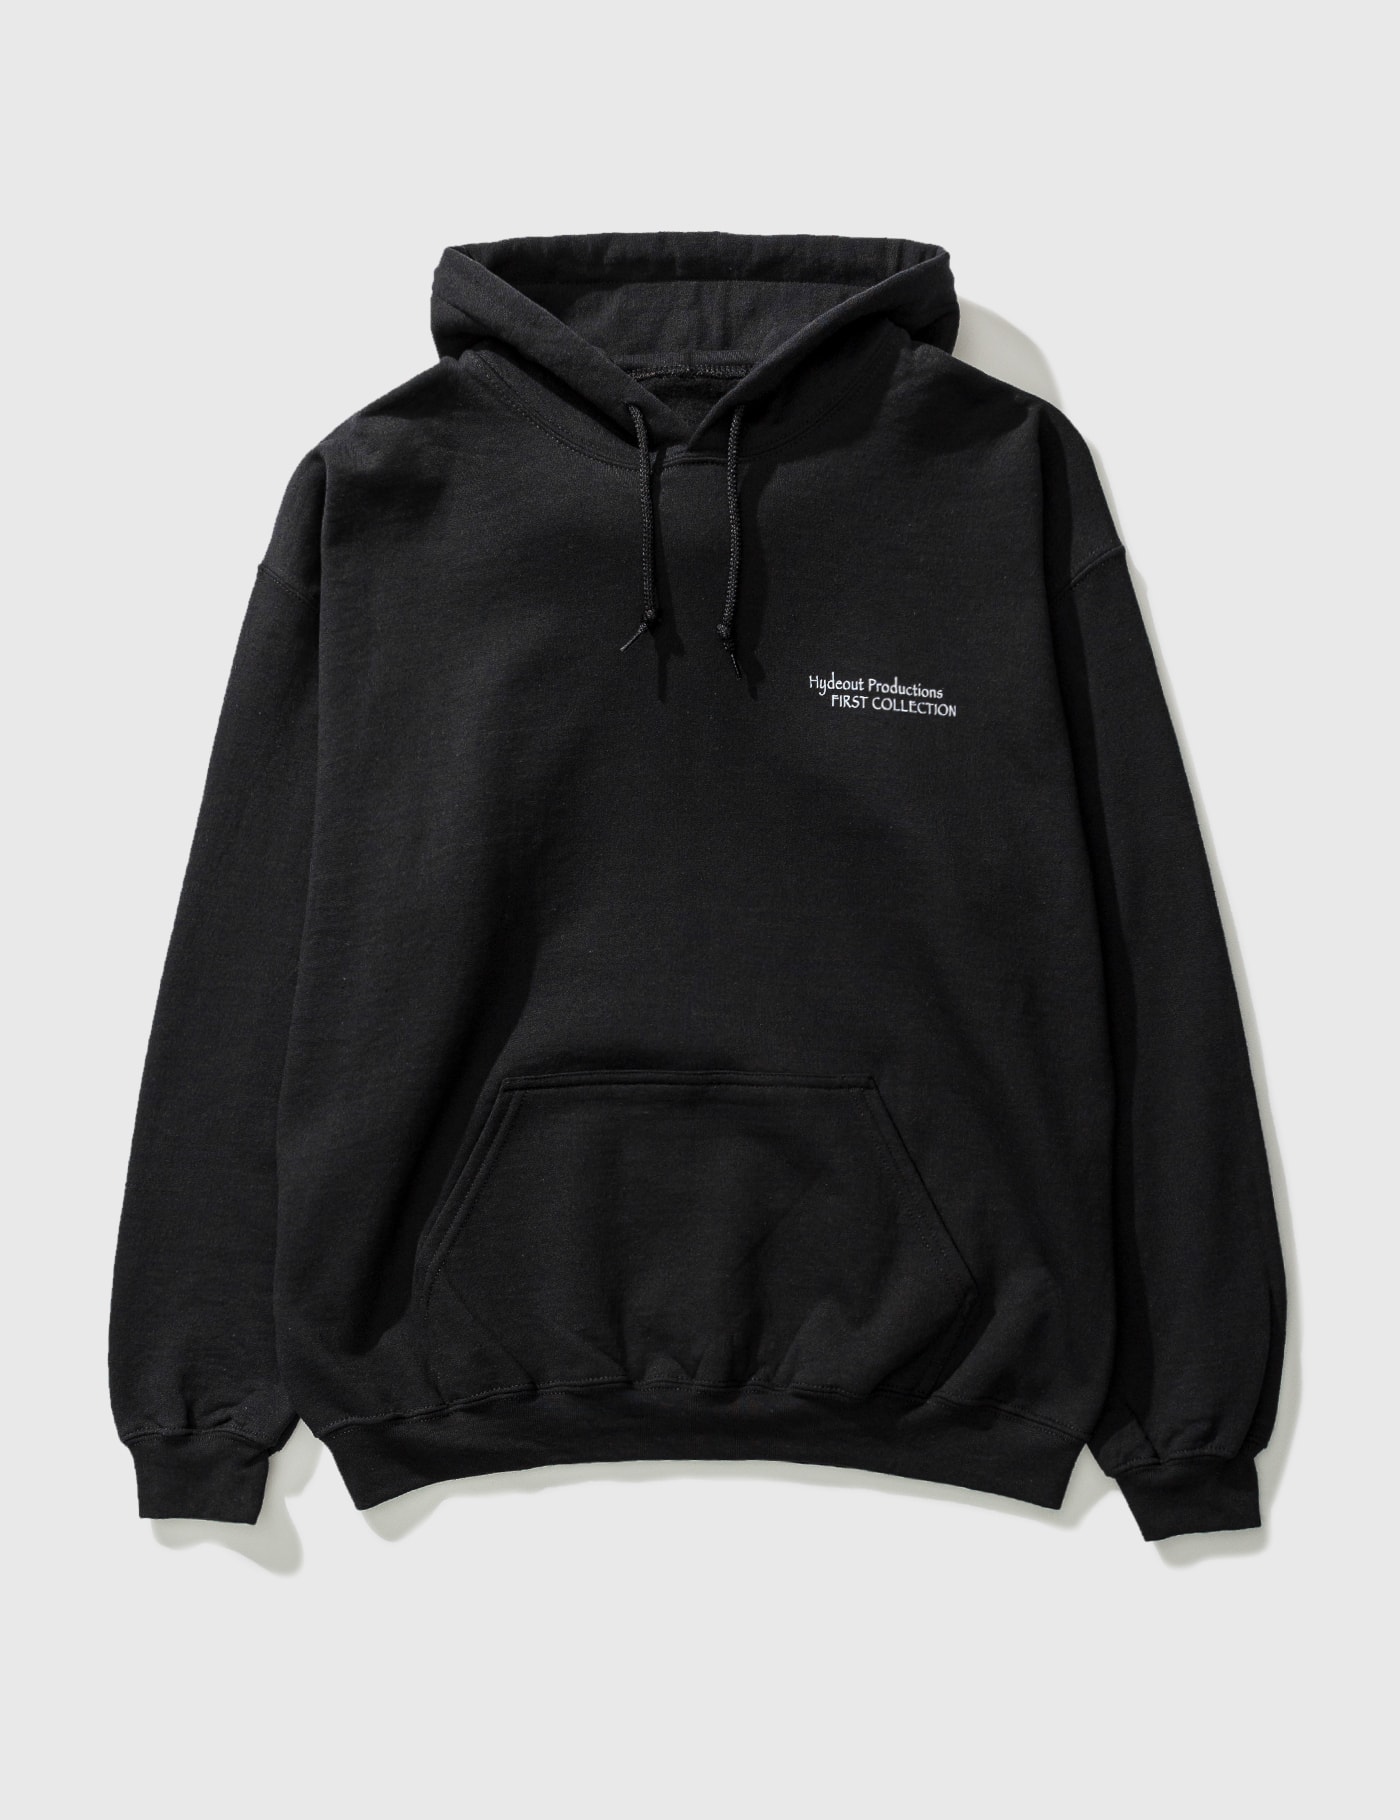 YEN TOWN MARKET FIRST COLLECTION COVER HOODIE